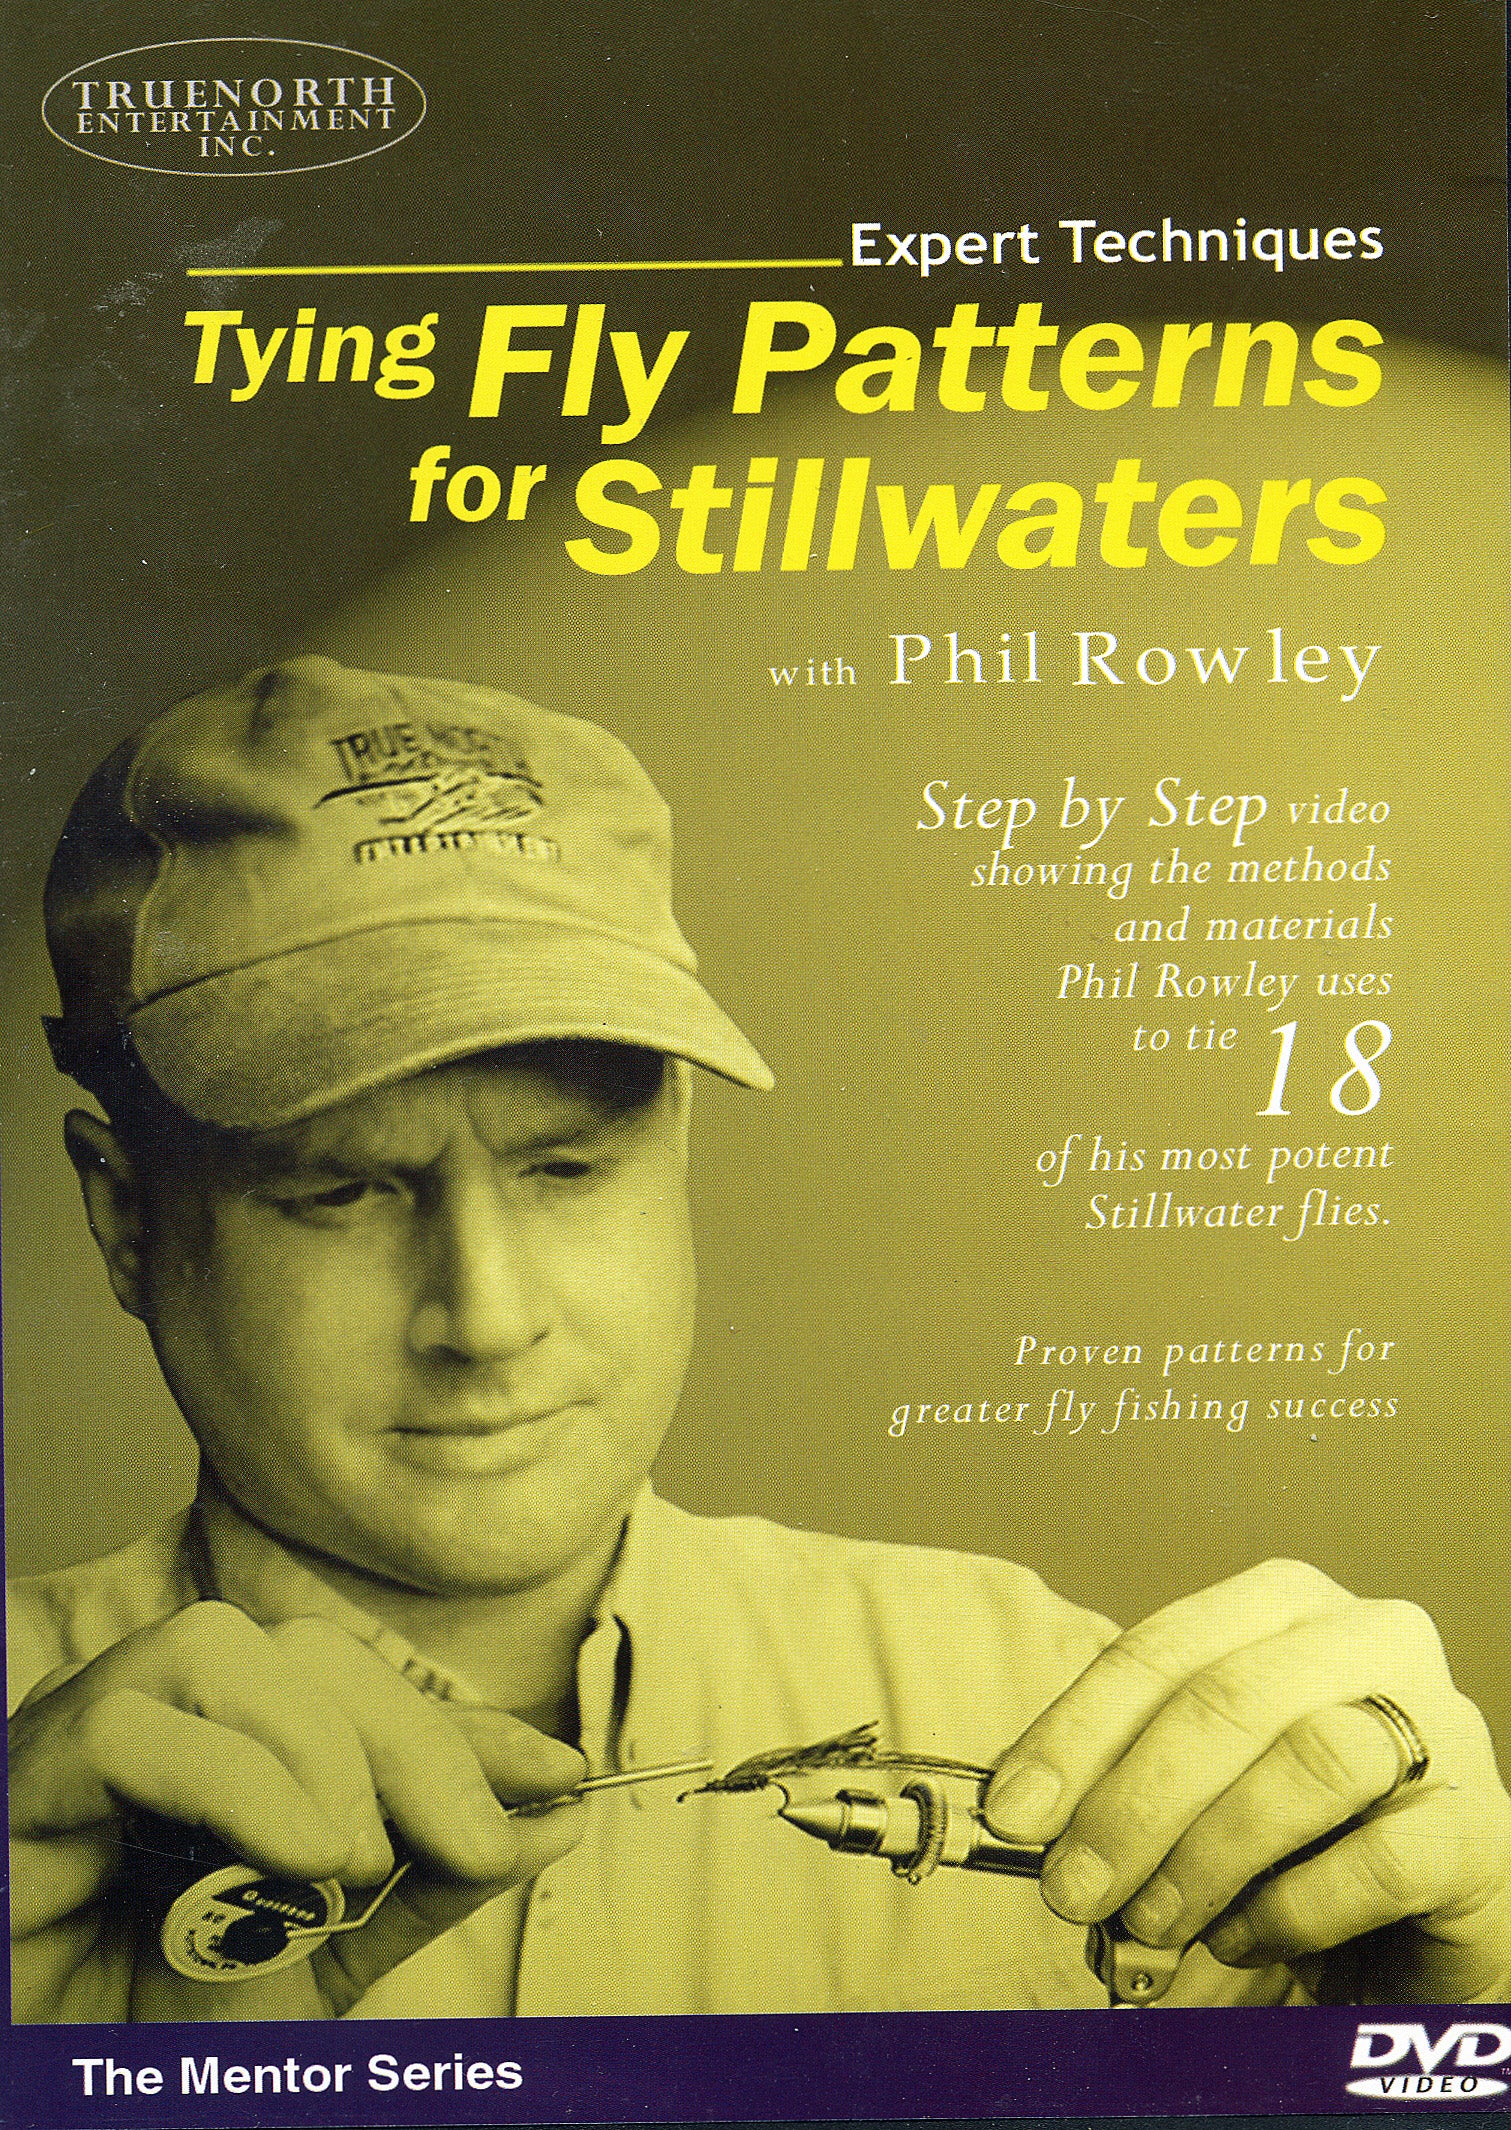 Tying Fly Patterns for Stillwaters